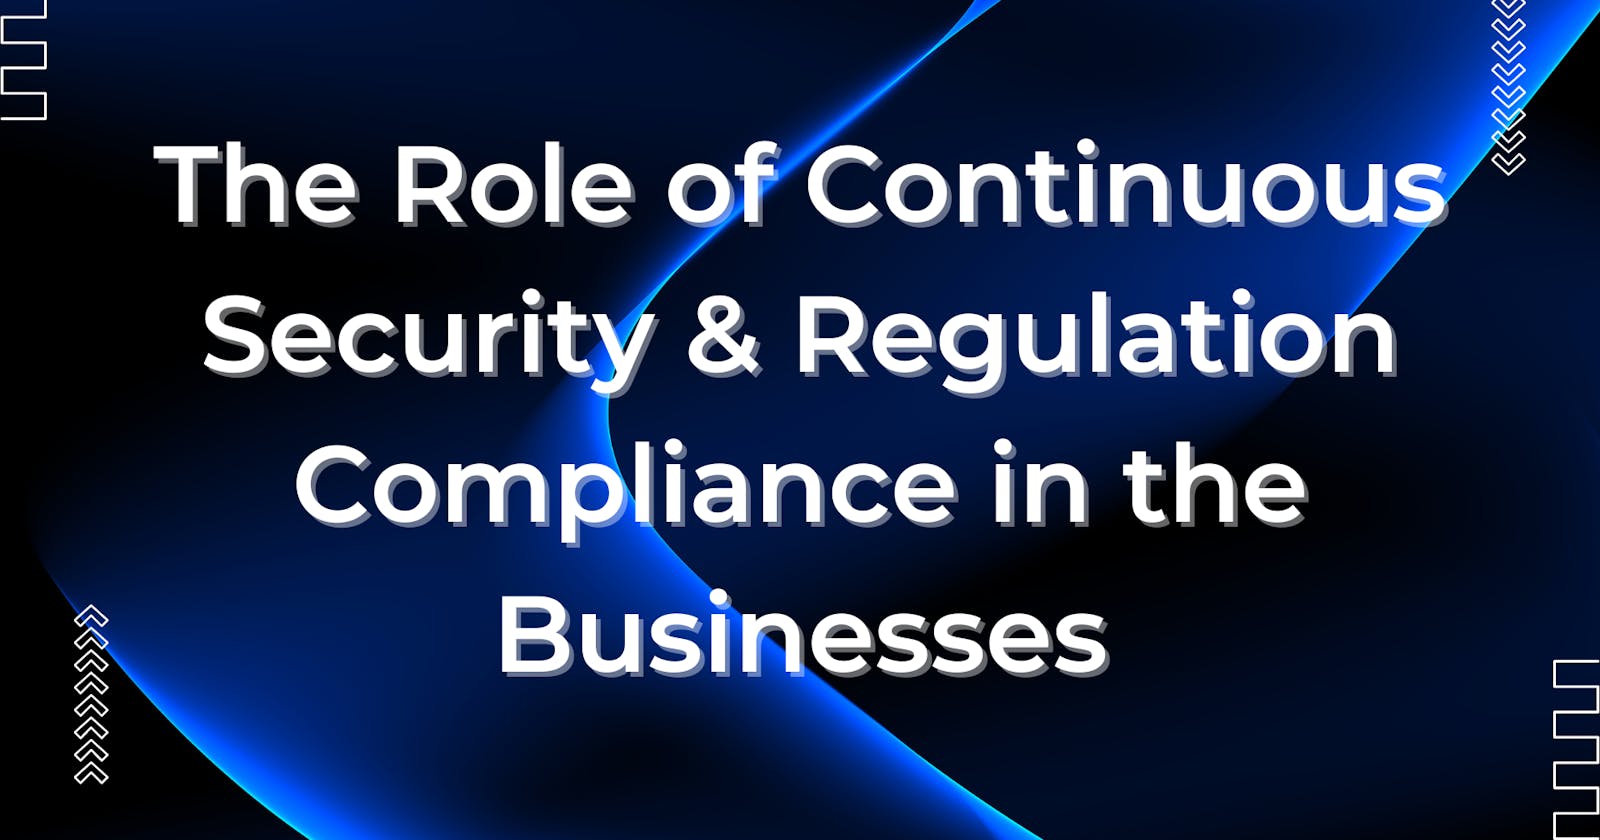 The Role of Continuous Security & Regulation Compliance in the Businesses